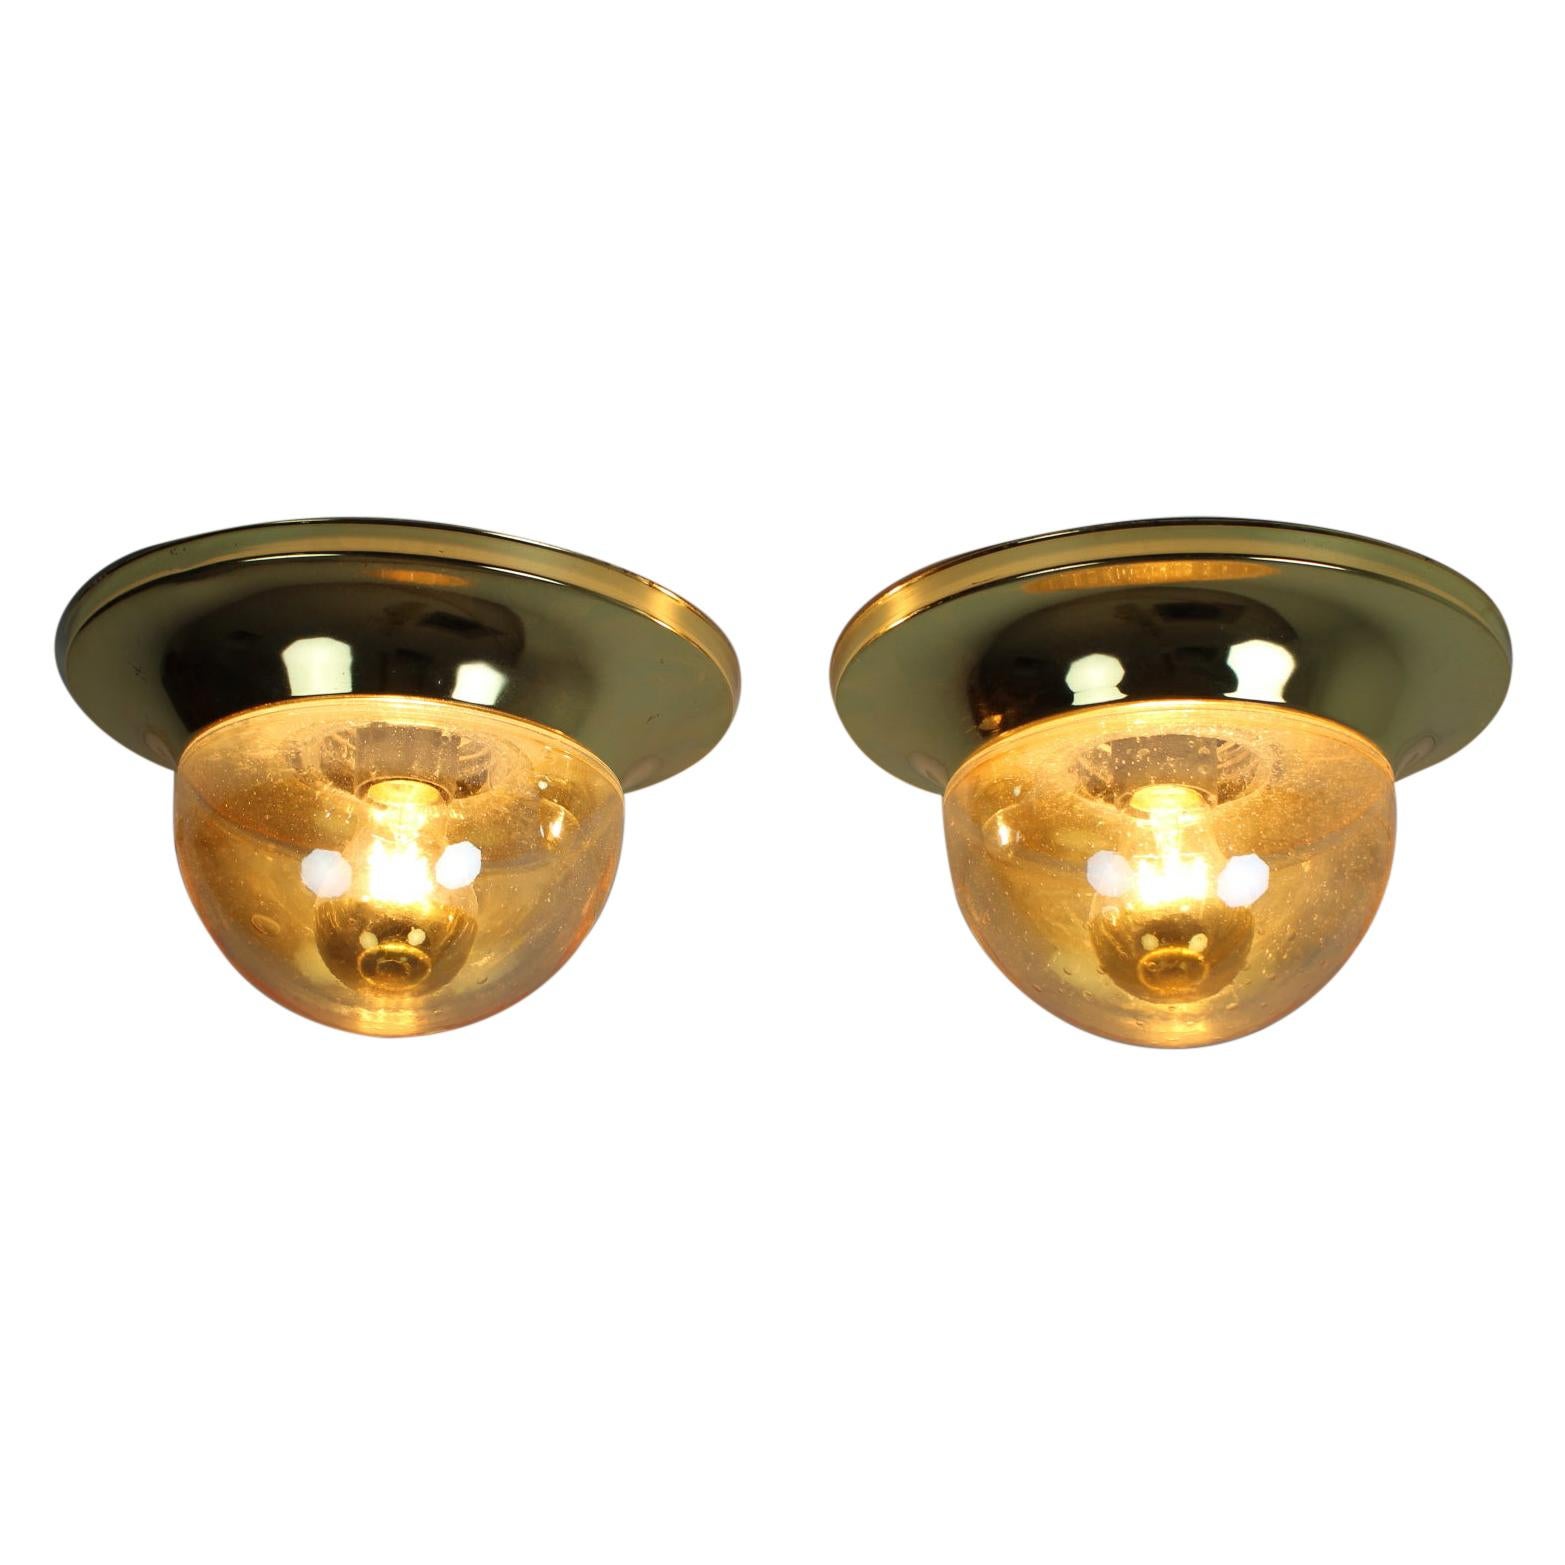 Pair of Brass Austria Wall Lamps, 1950's